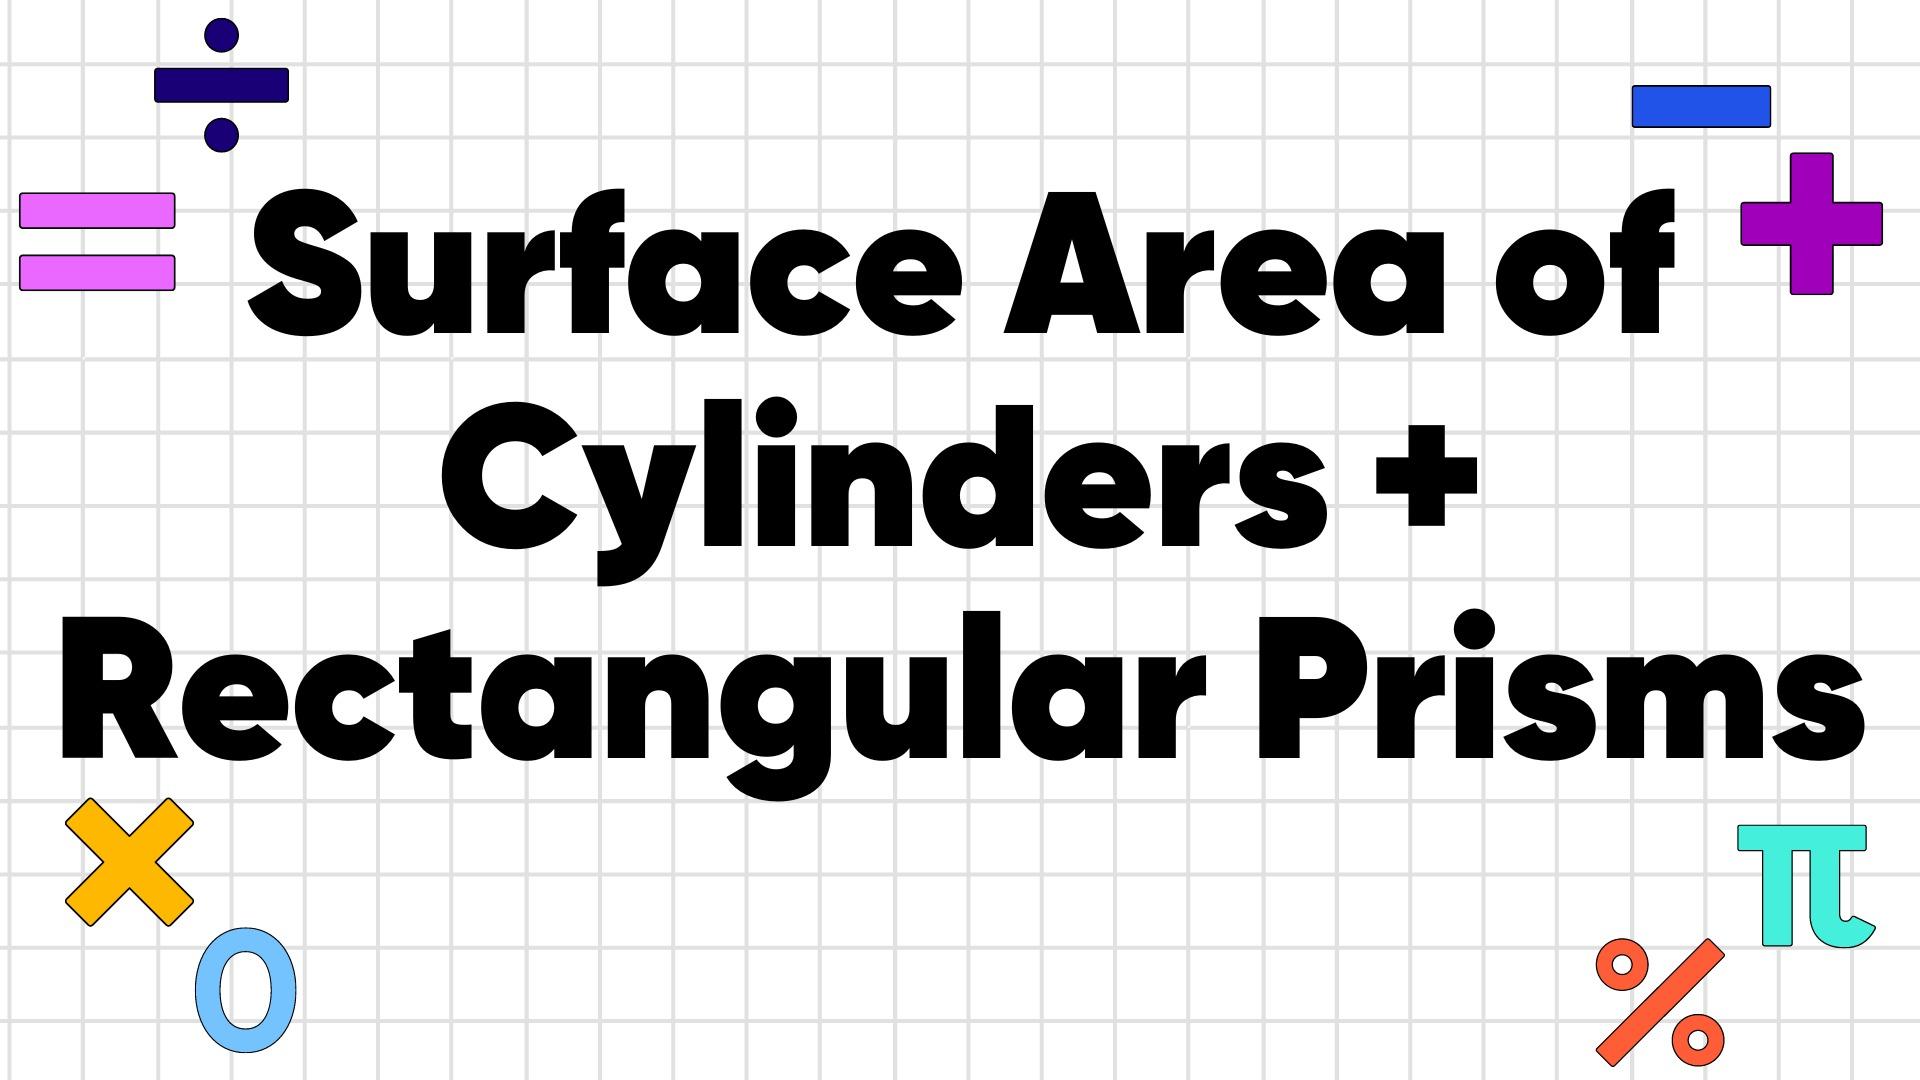 How to solve for the Surface Area of a Cylinder and Rectangular Prism